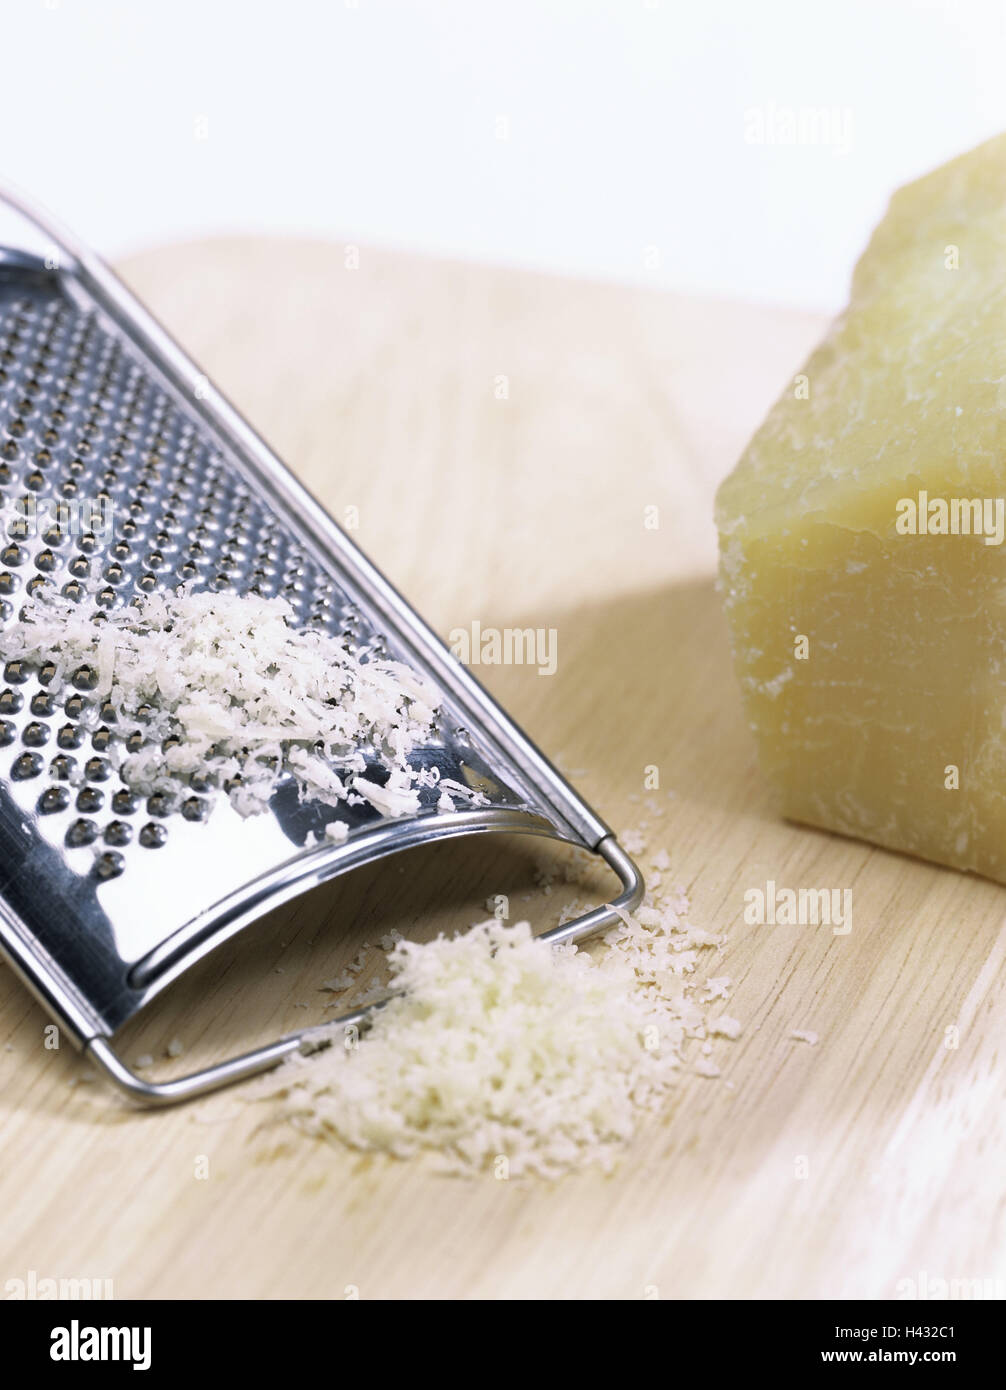 https://c8.alamy.com/comp/H432C1/parmesan-cheese-cheese-traders-yew-food-lacteal-product-cheese-grated-H432C1.jpg